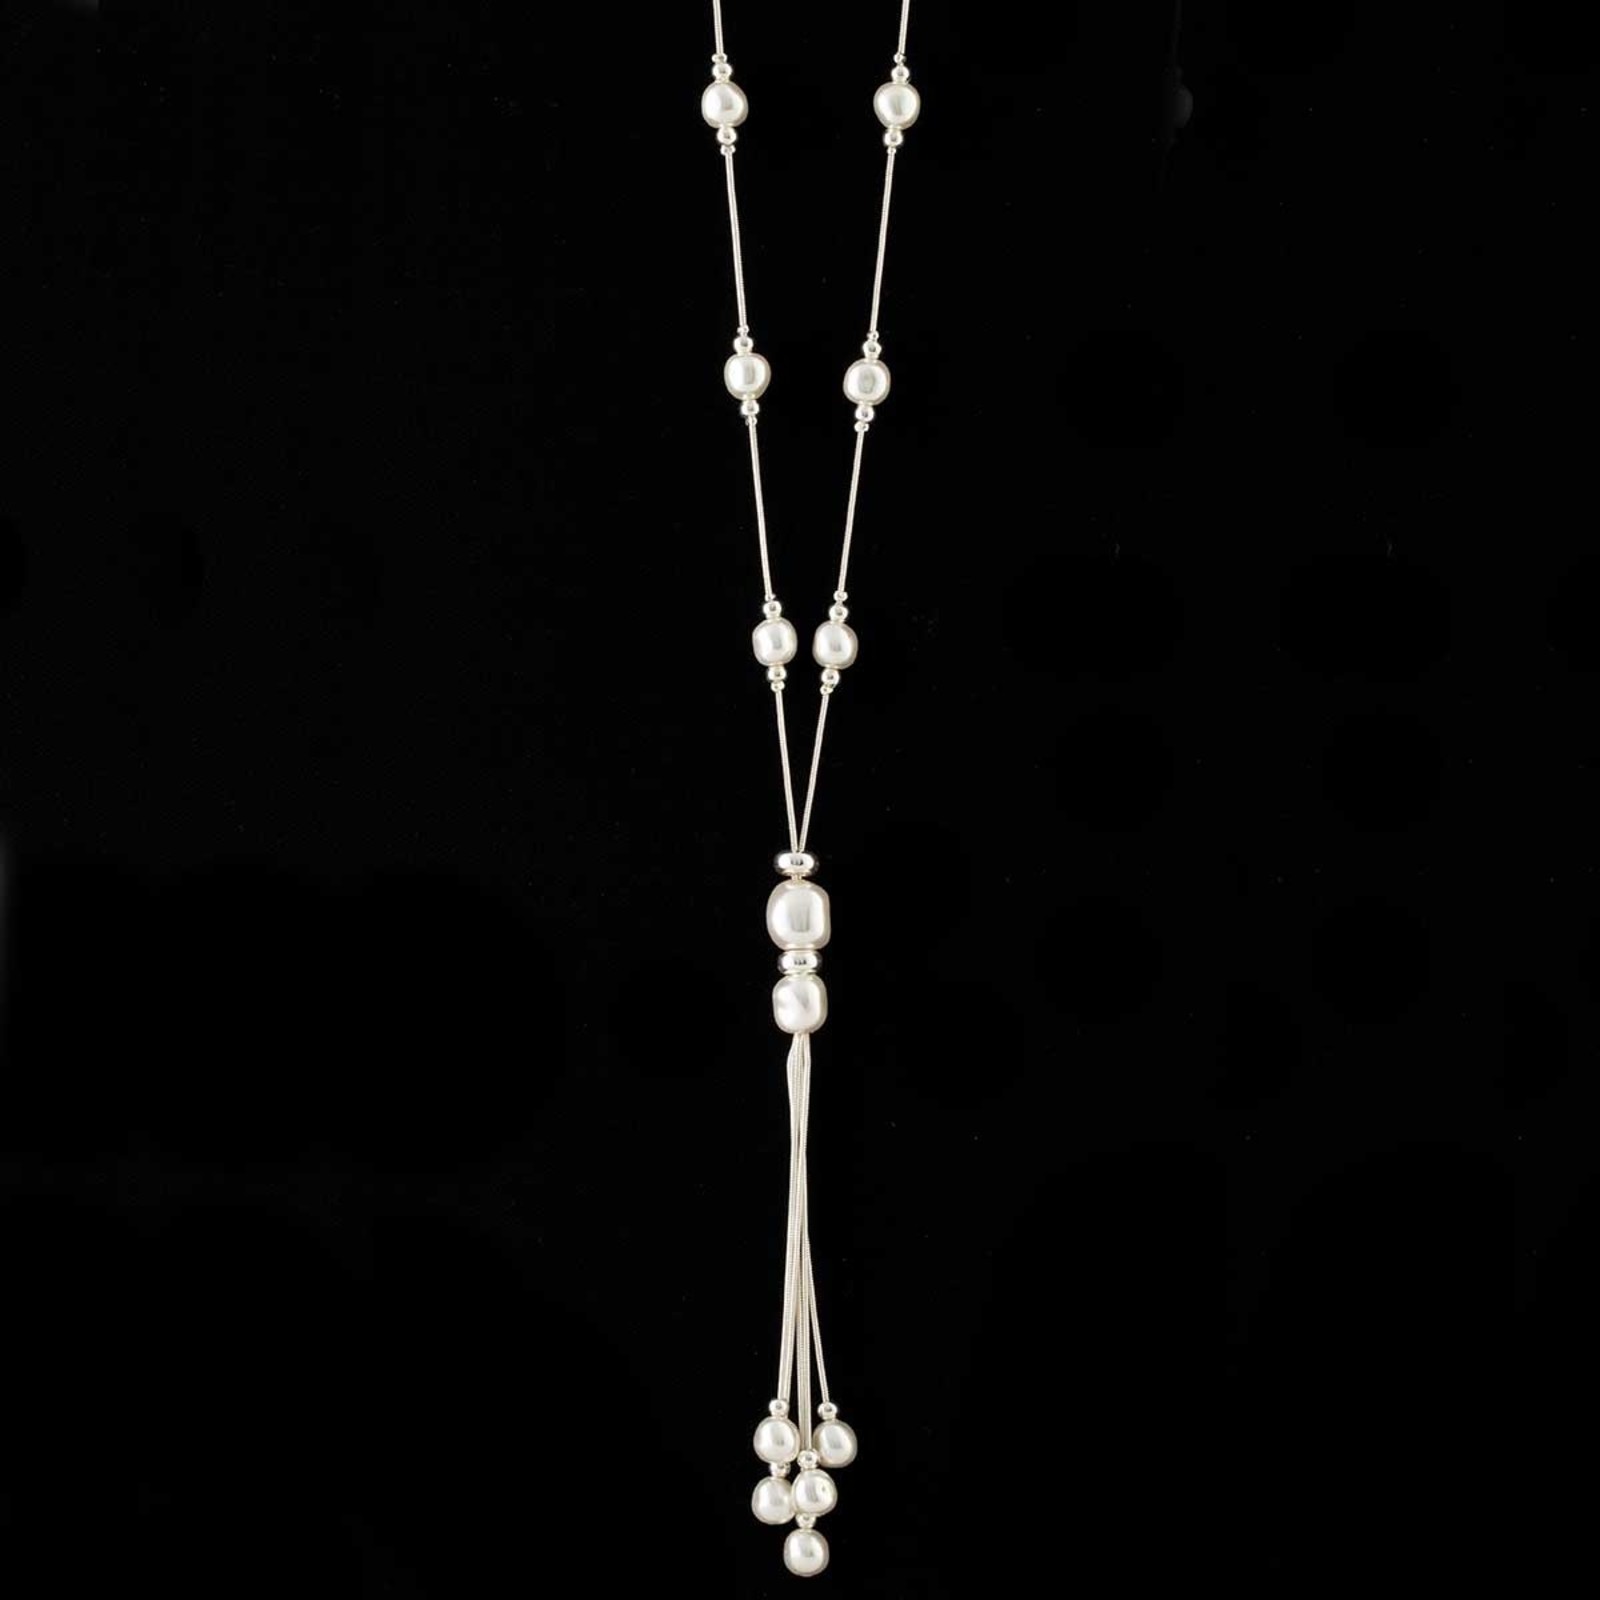 Trezo Satin Silver Pearl Bead with Tassel Necklace on Chain  C3161 loading=